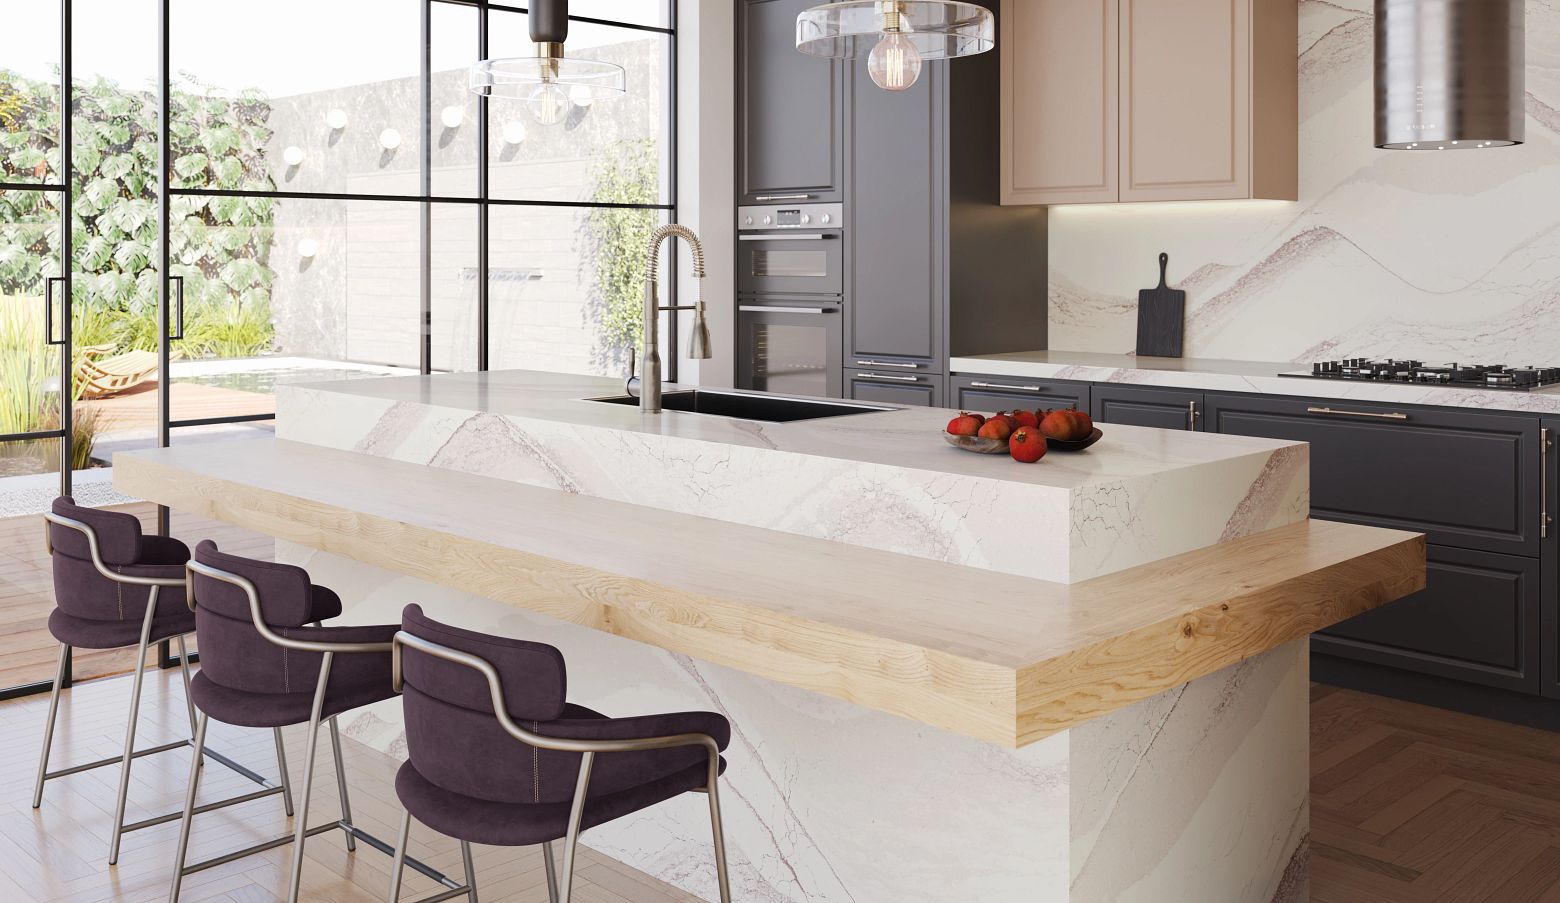 Countertop in kitchen | Nampa, ID